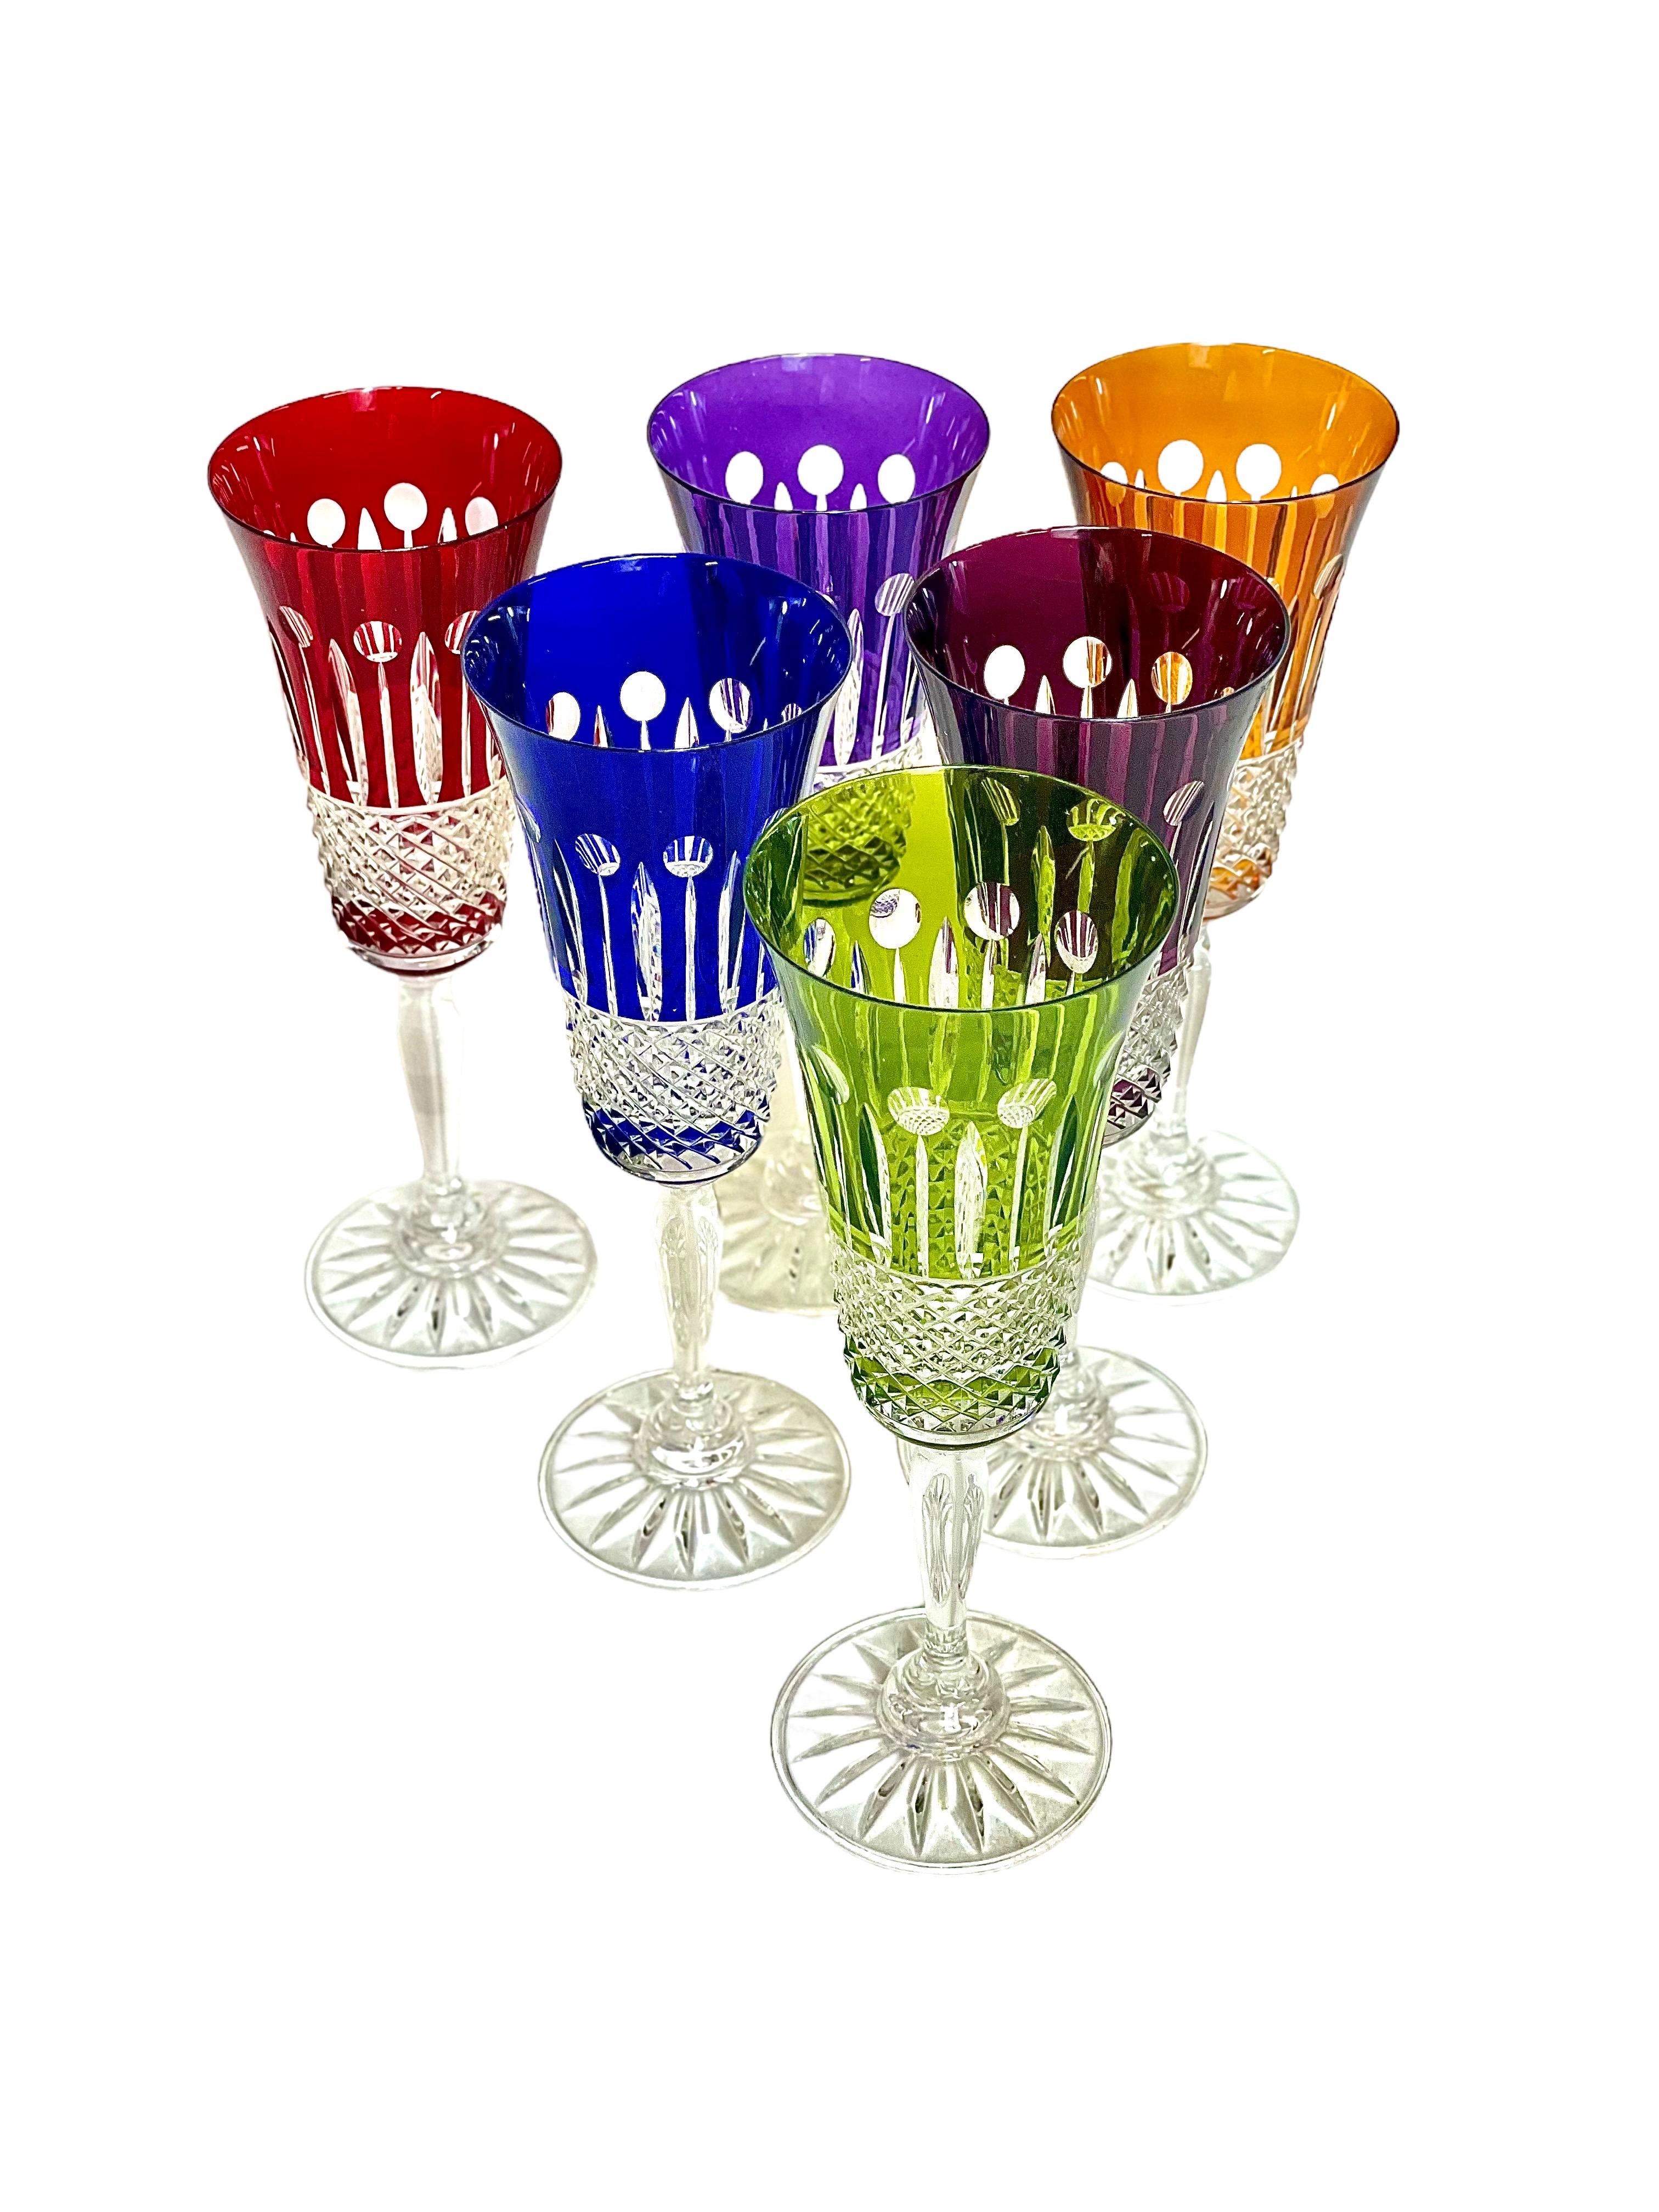 A vibrant set of six Champagne flutes made by the celebrated Compagnie des Cristalleries de Saint Louis in Lorraine, the oldest glass manufacturer in France, dating back to 1586. Mouth-blown and hand-cut, this set is part of the famous 'Tommy'